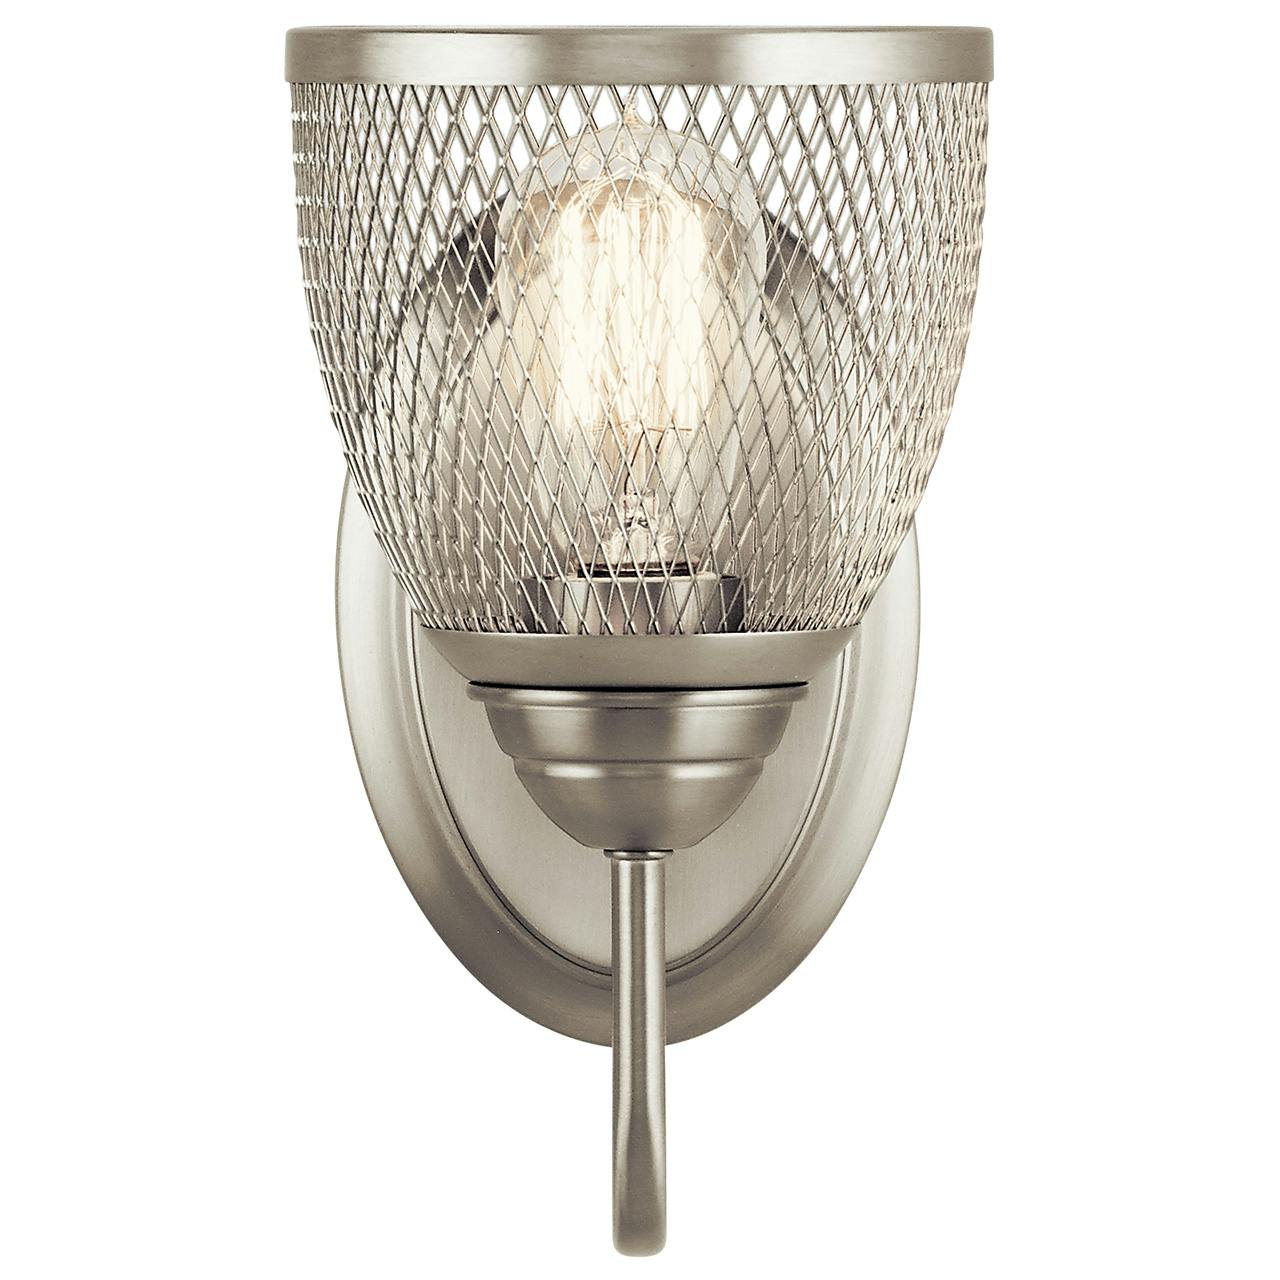 The Voclain 1 Light Wall Sconce Brushed Nickel facing up on a white background